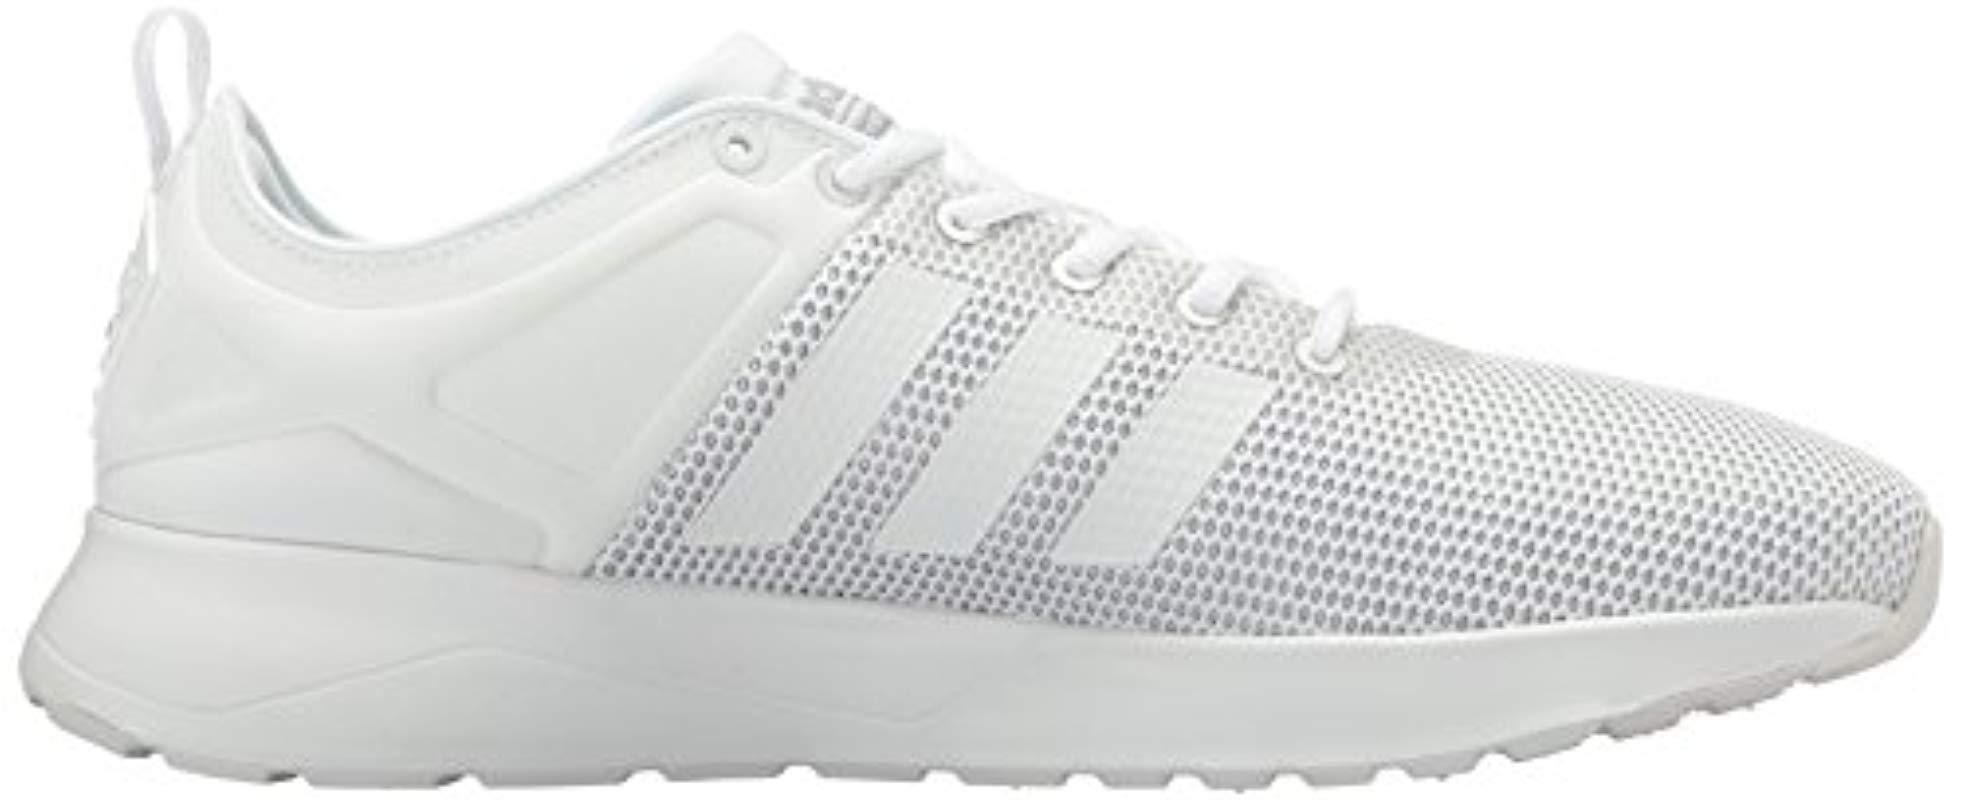 adidas Neo Cloudfoam Super Racer Running Shoe in White for Men - Lyst